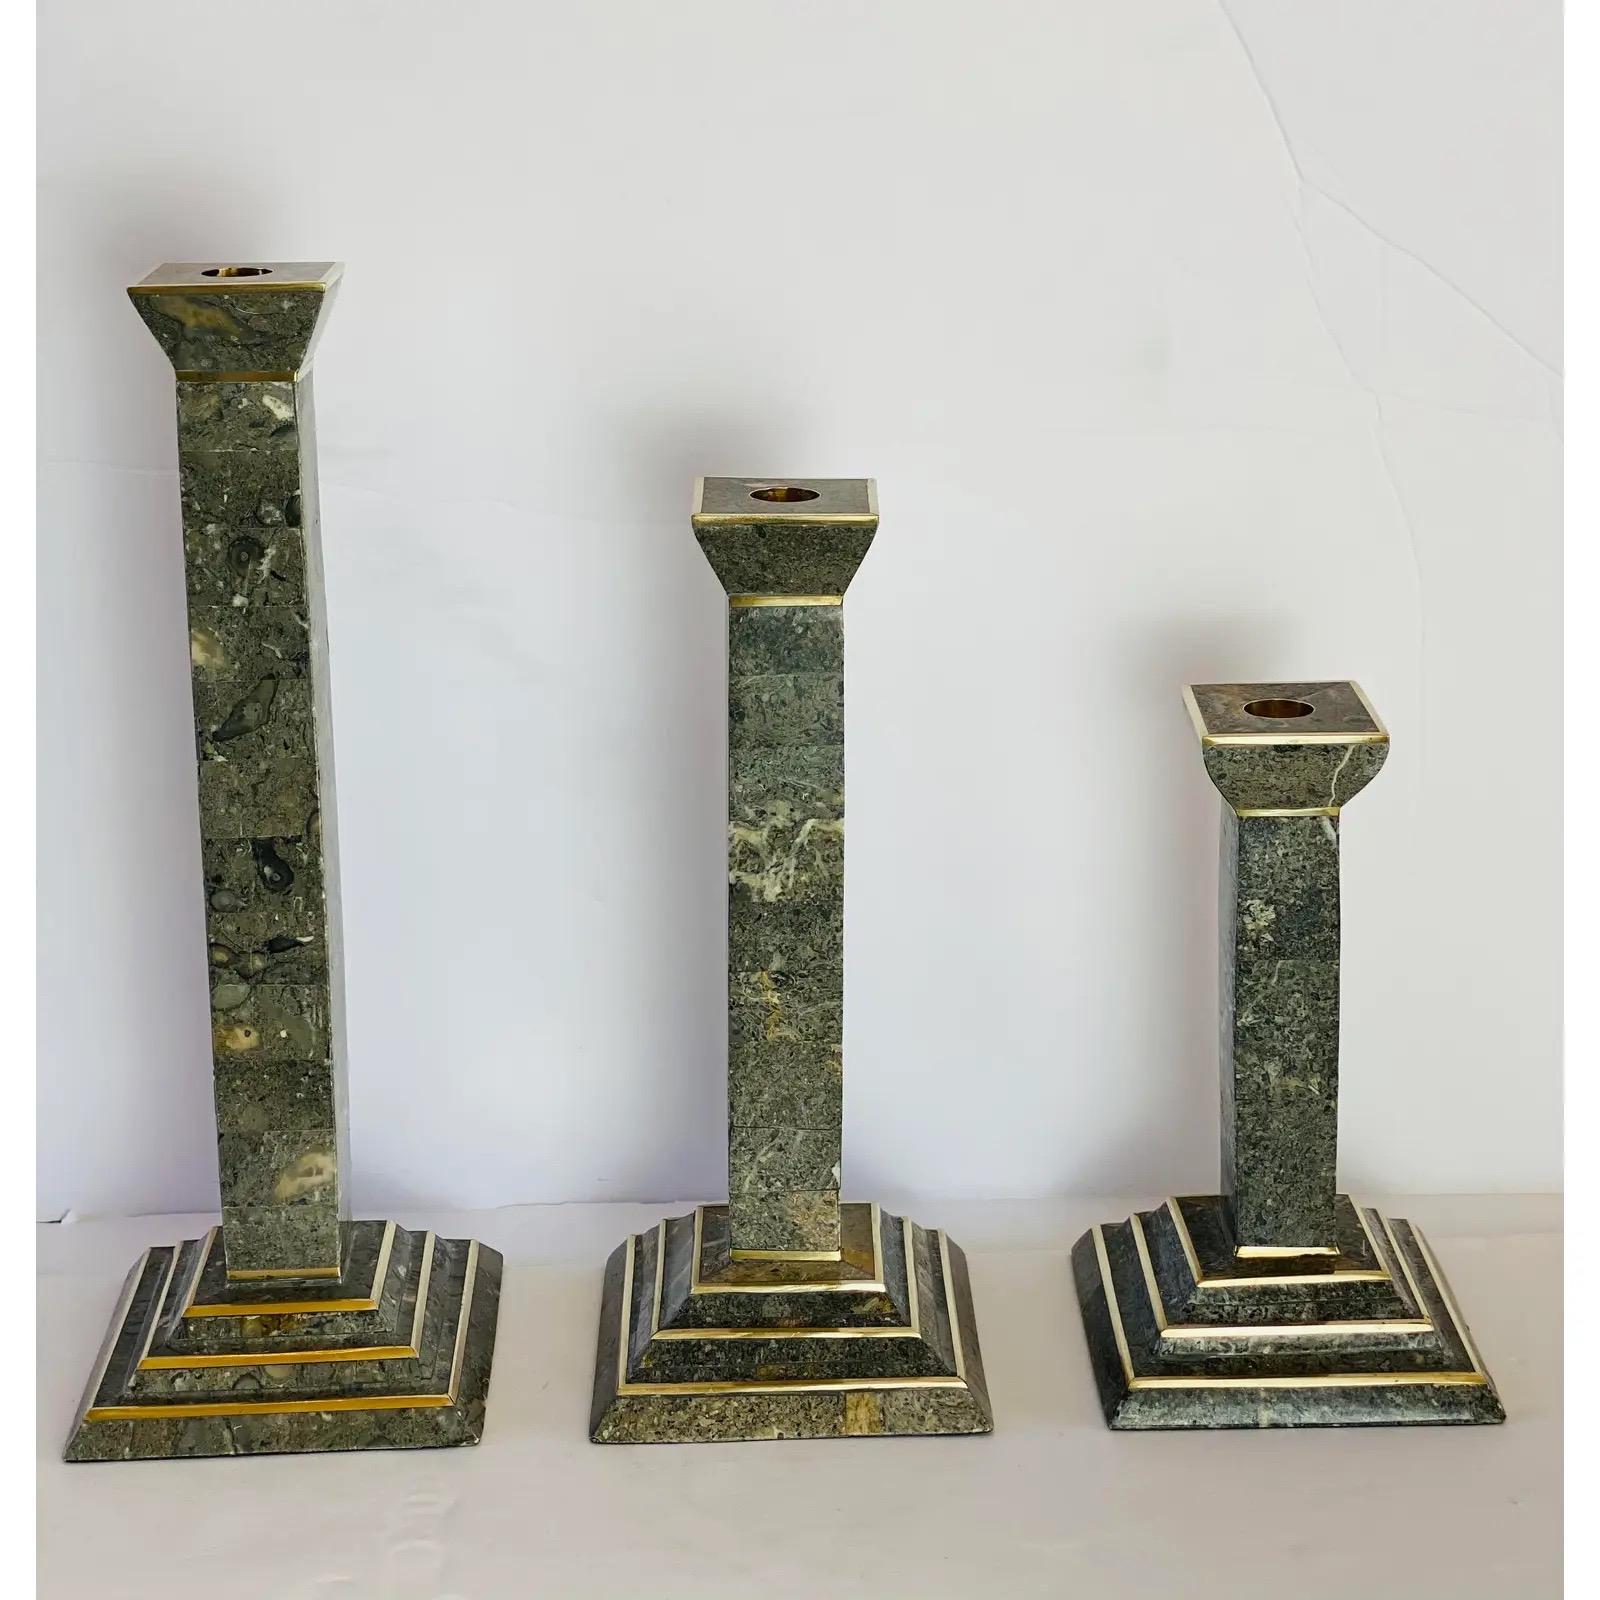 We are very pleased to offer a set of three monumental candlesticks by Robert Marcius for Casa Bisque, circa the 1980s. This sculptural set showcases a grey tessellated stone with inlaid brass accents. In great vintage condition consistent with wear